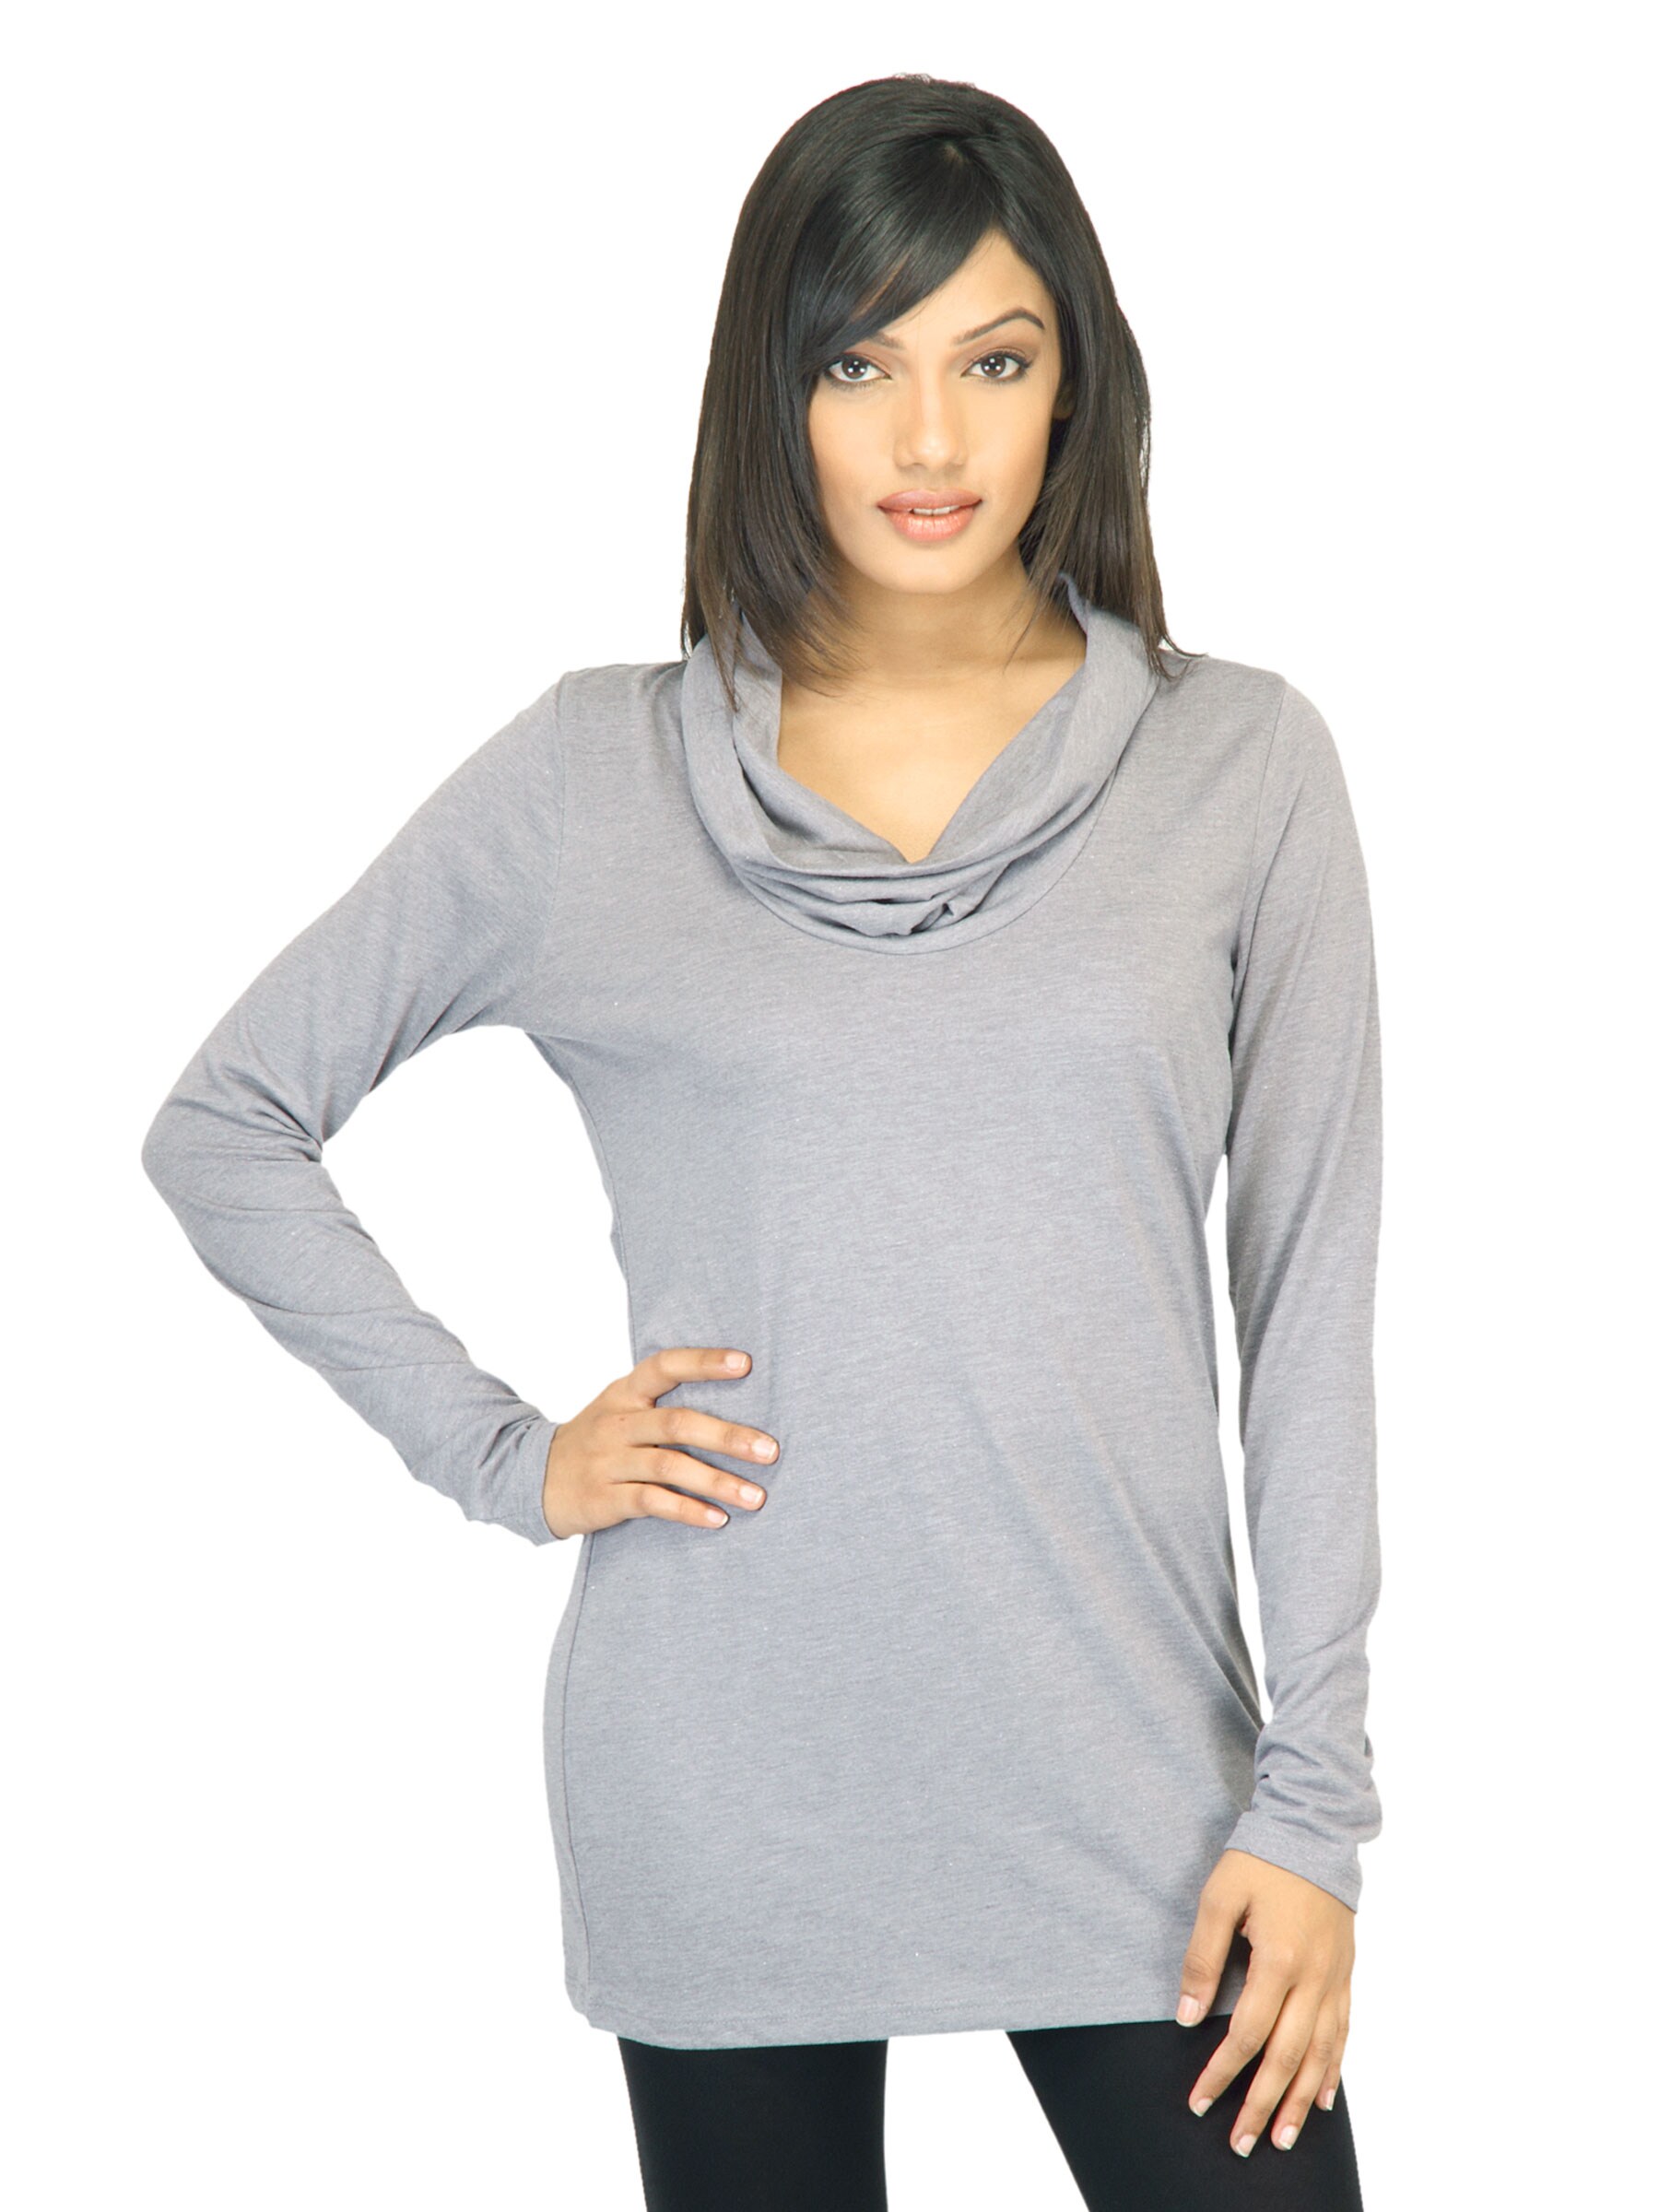 United Colors of Benetton Women Solid Grey Top